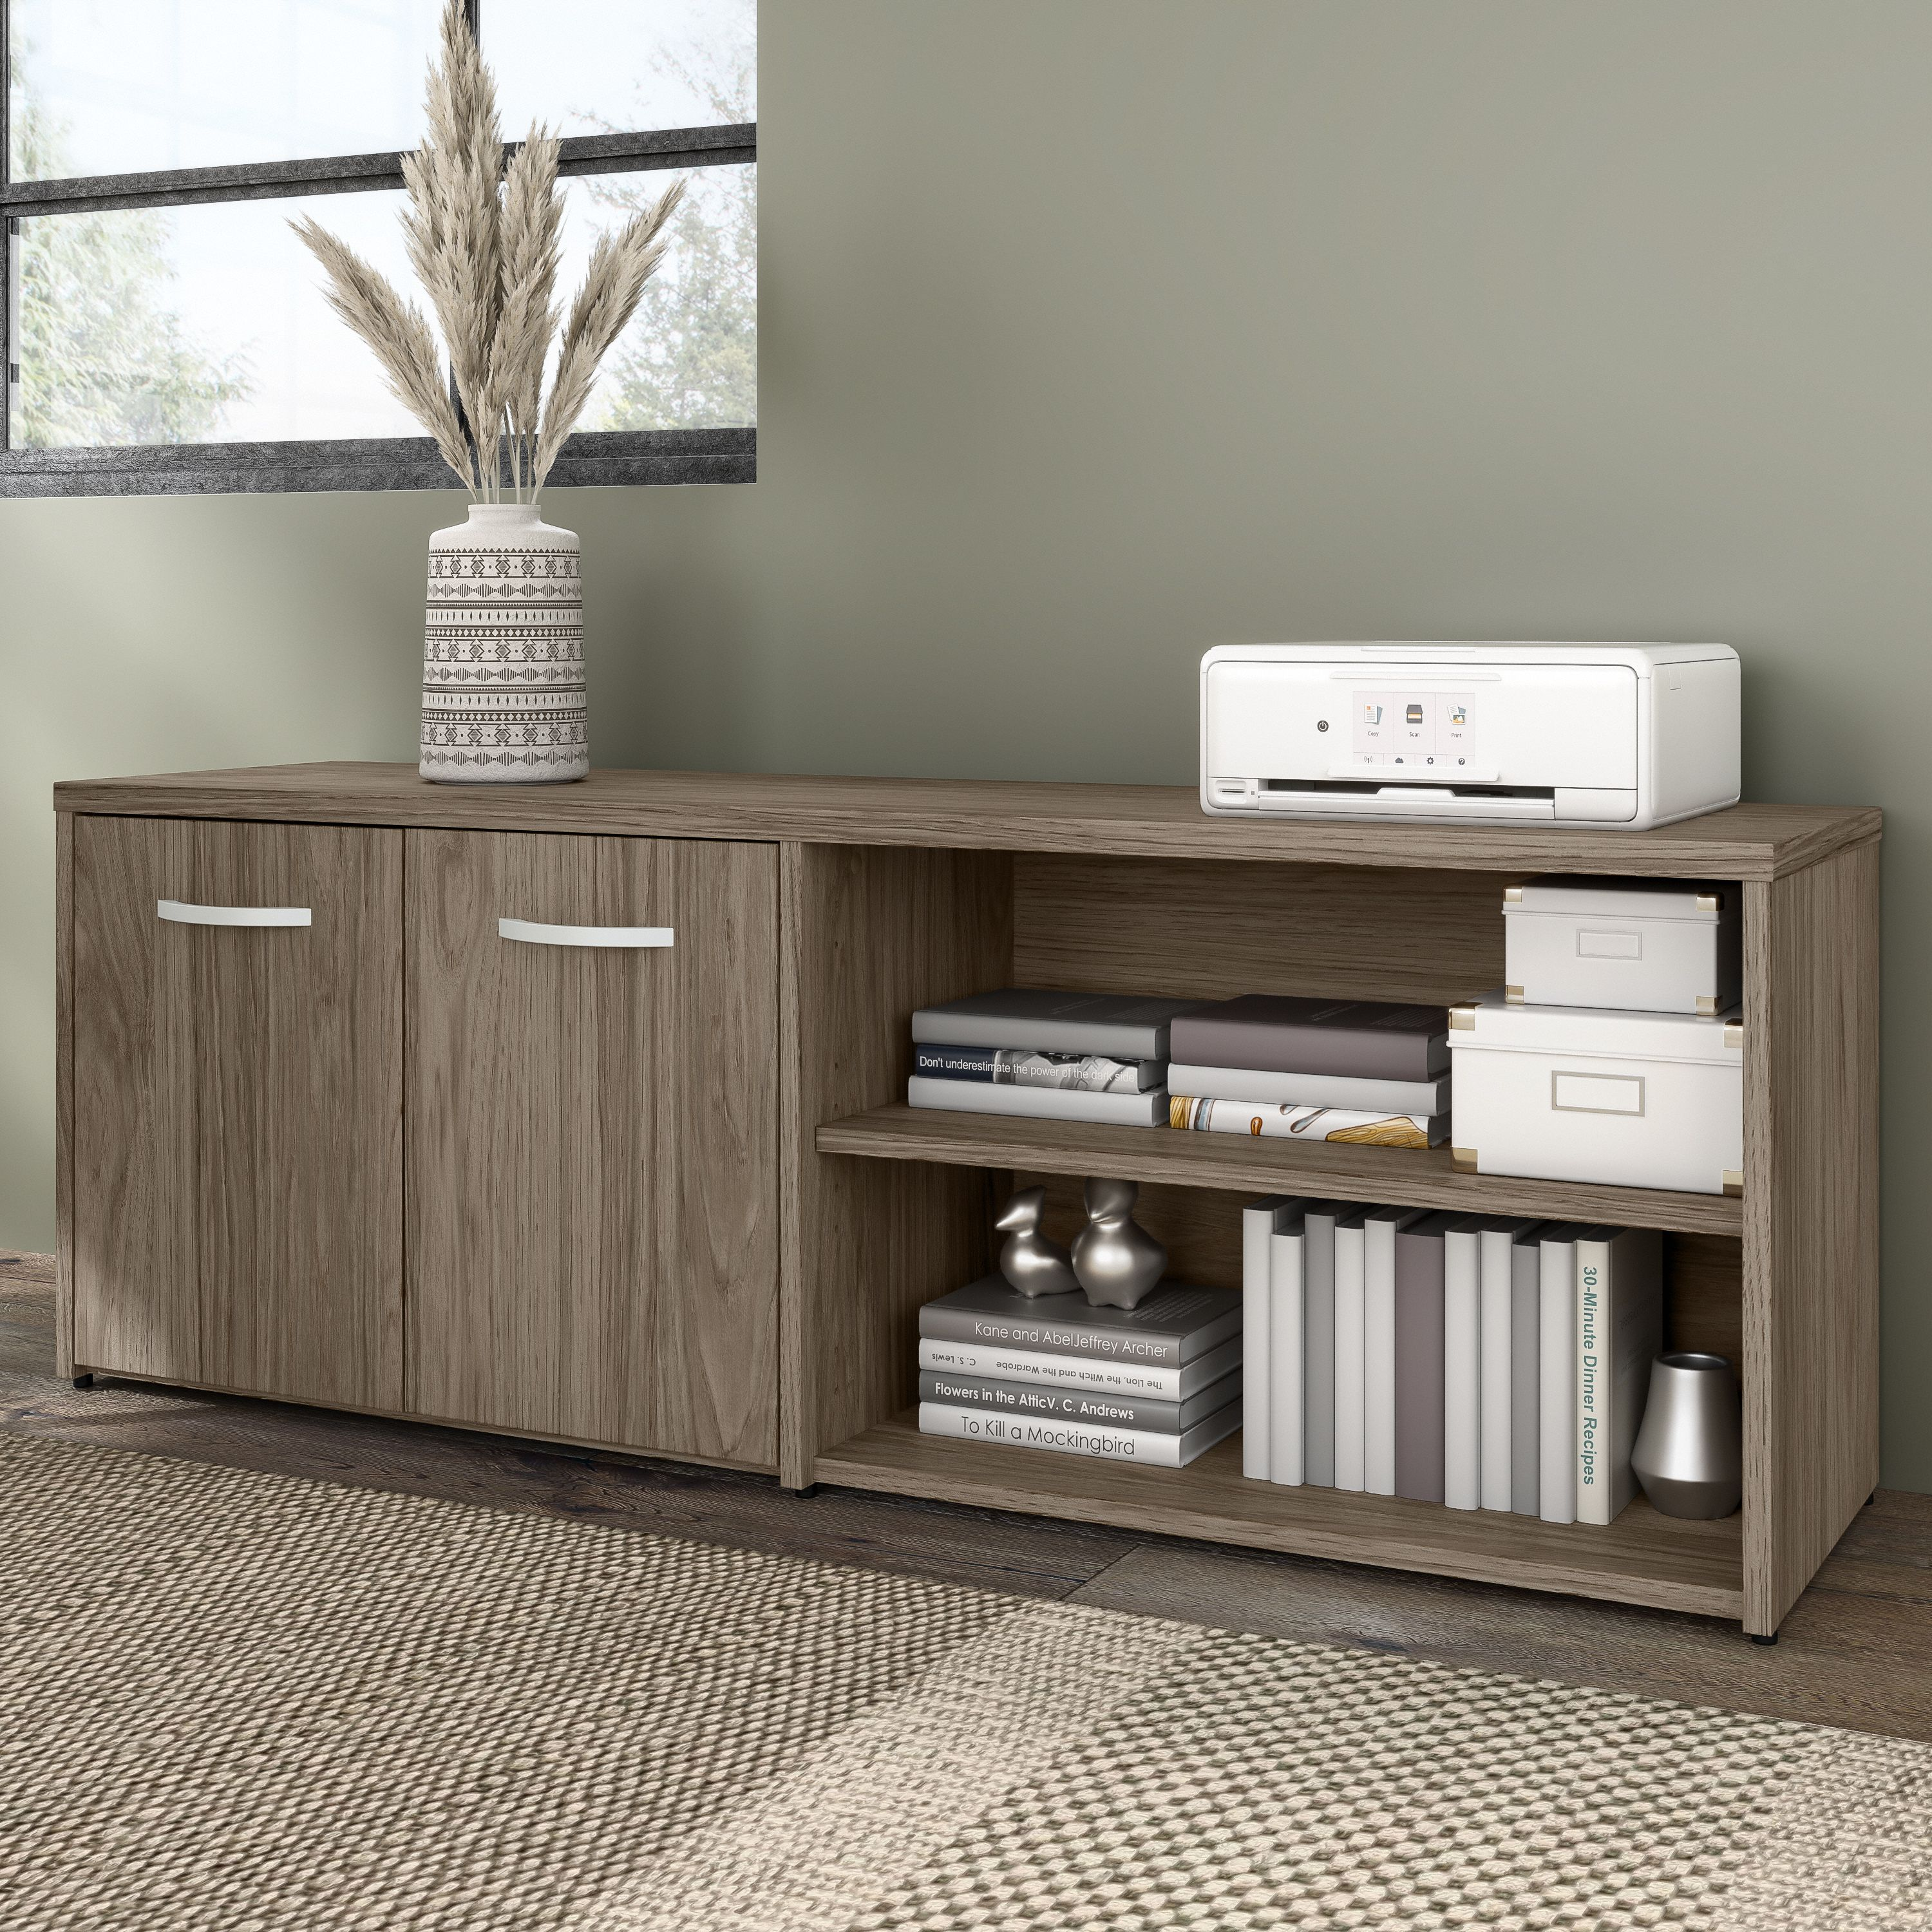 Shop Bush Business Furniture Hybrid Low Storage Cabinet with Doors and Shelves 01 HYS160MH-Z #color_modern hickory